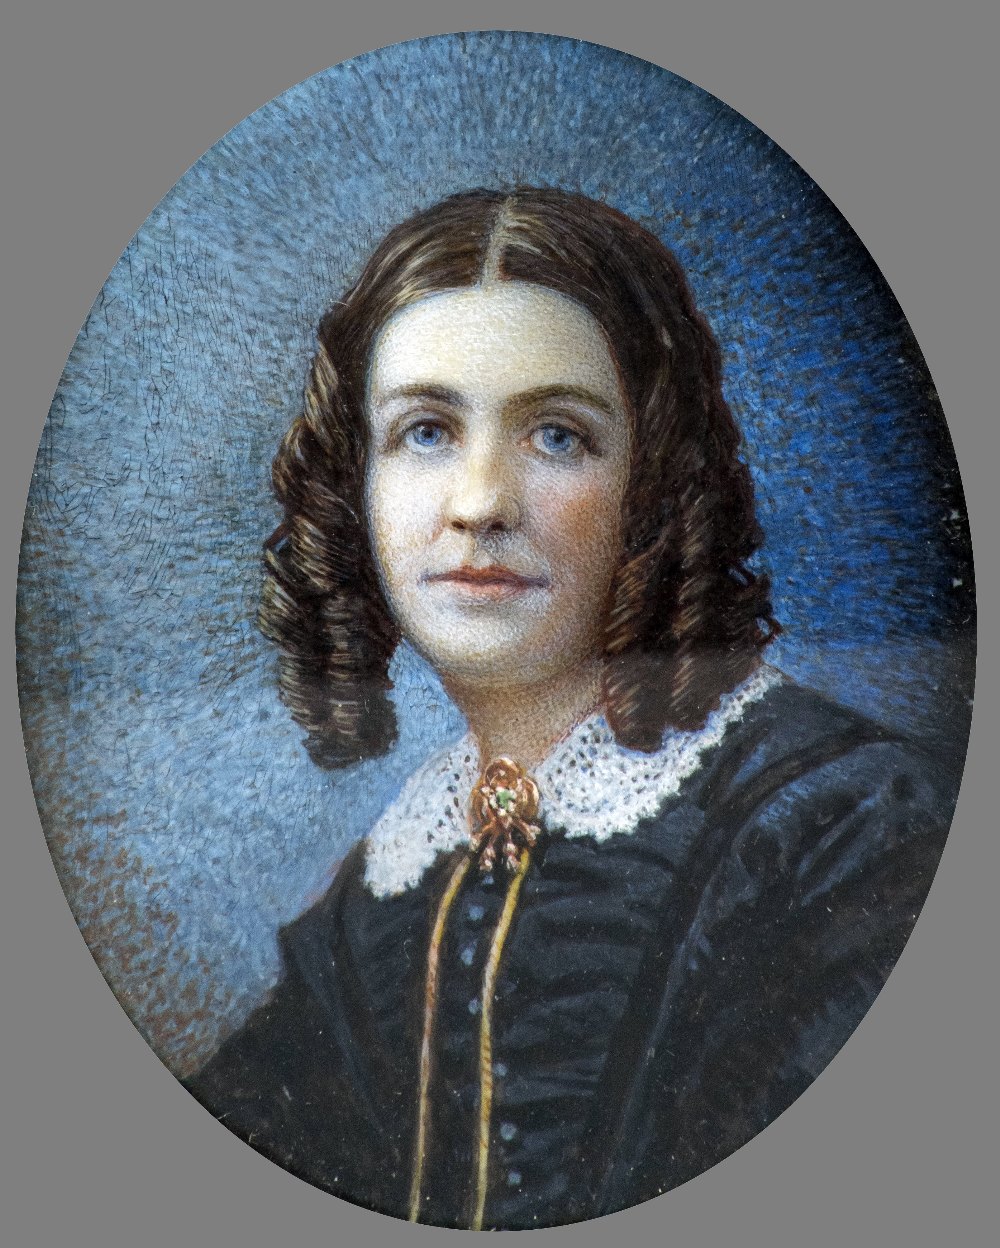 ENGLISH SCHOOL (19th century) Portrait Miniature of a Young Lady,